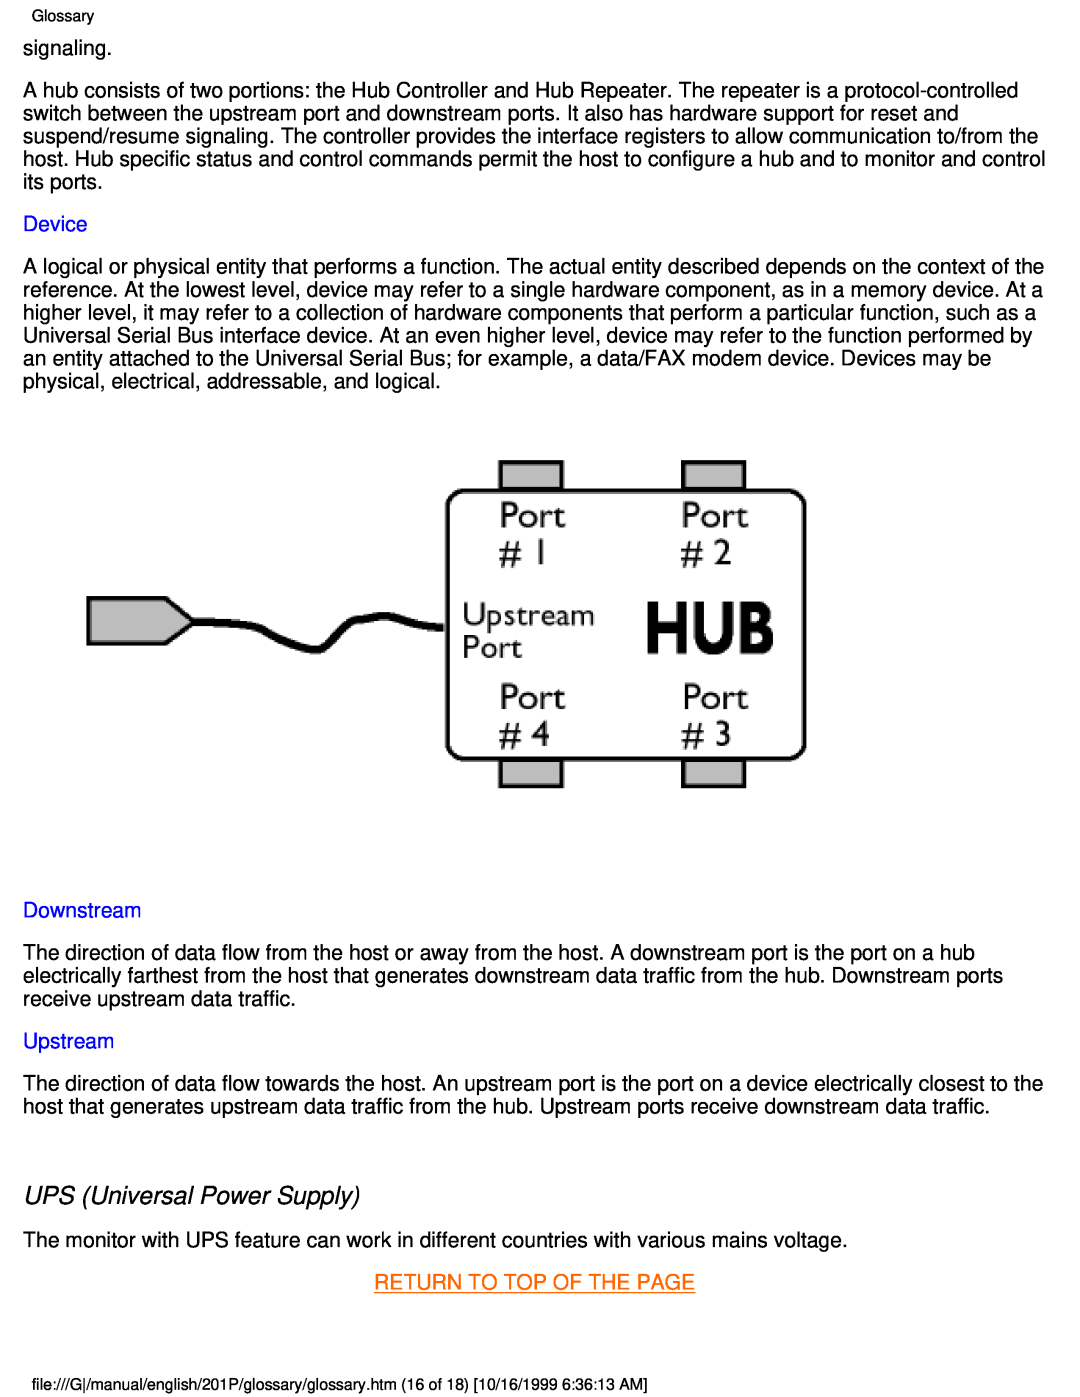 Philips 201P user manual UPS Universal Power Supply, Return To Top Of The Page 